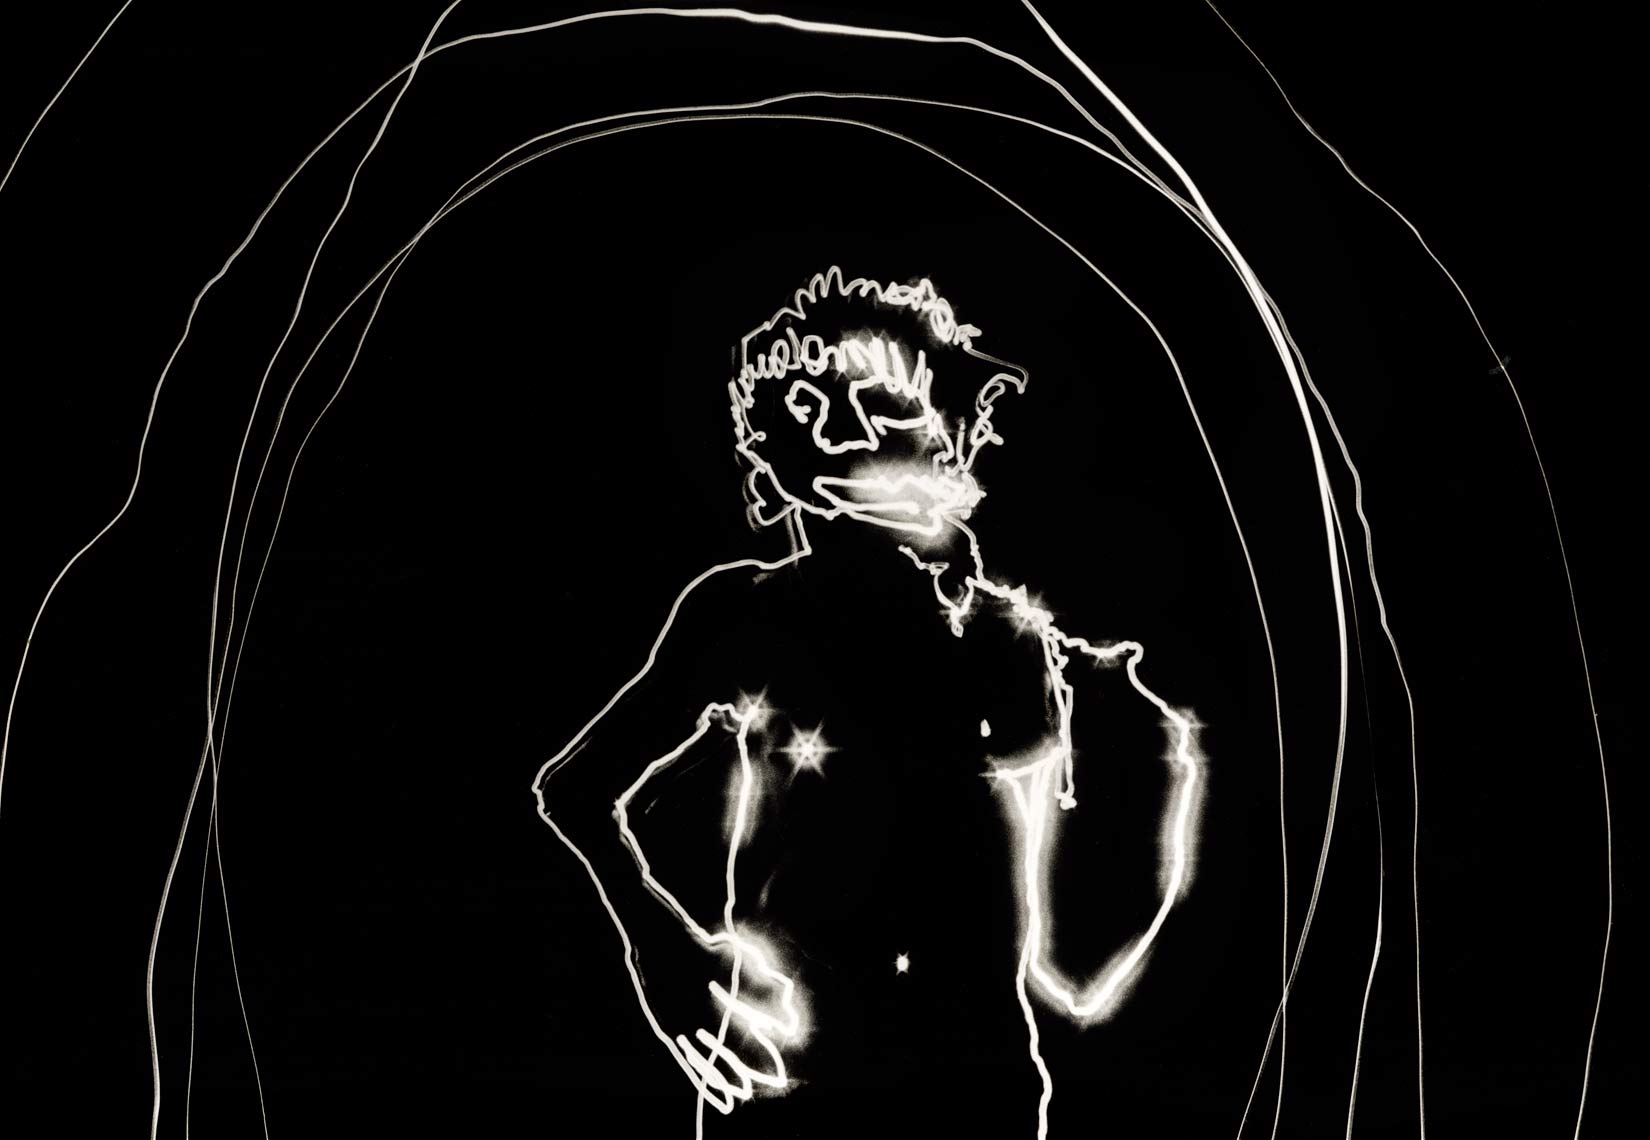 David Lebe; Self Portrait 3, 1976, male nude, light drawing, black and white photograph